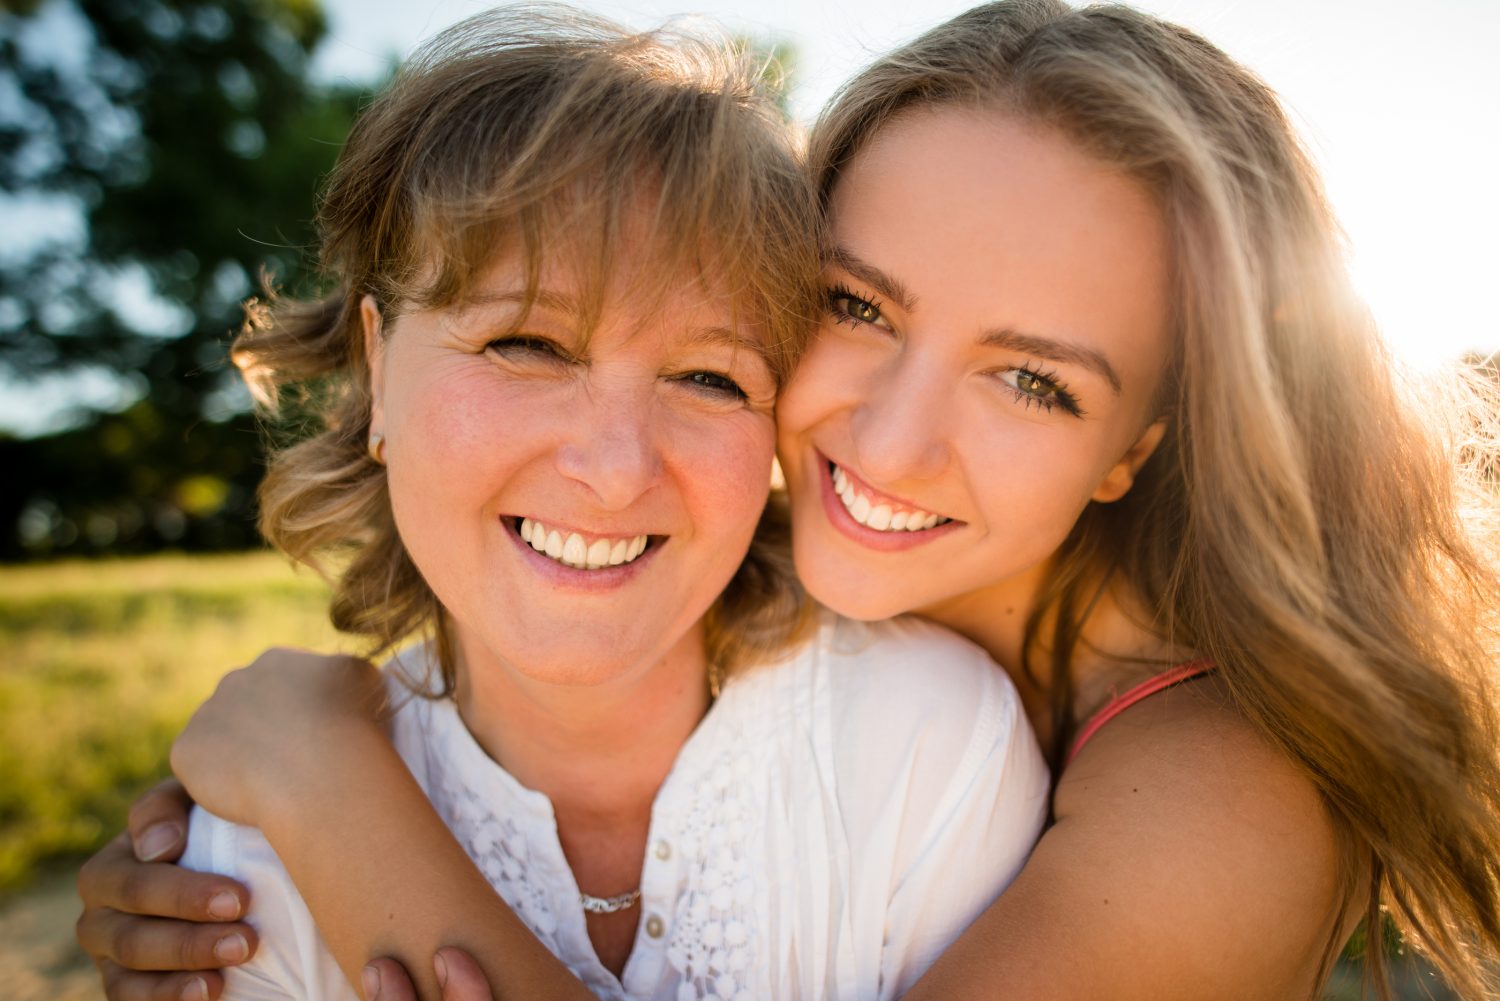 How to Influence Others Positively - Mother and teenage daughter outdoor portrait